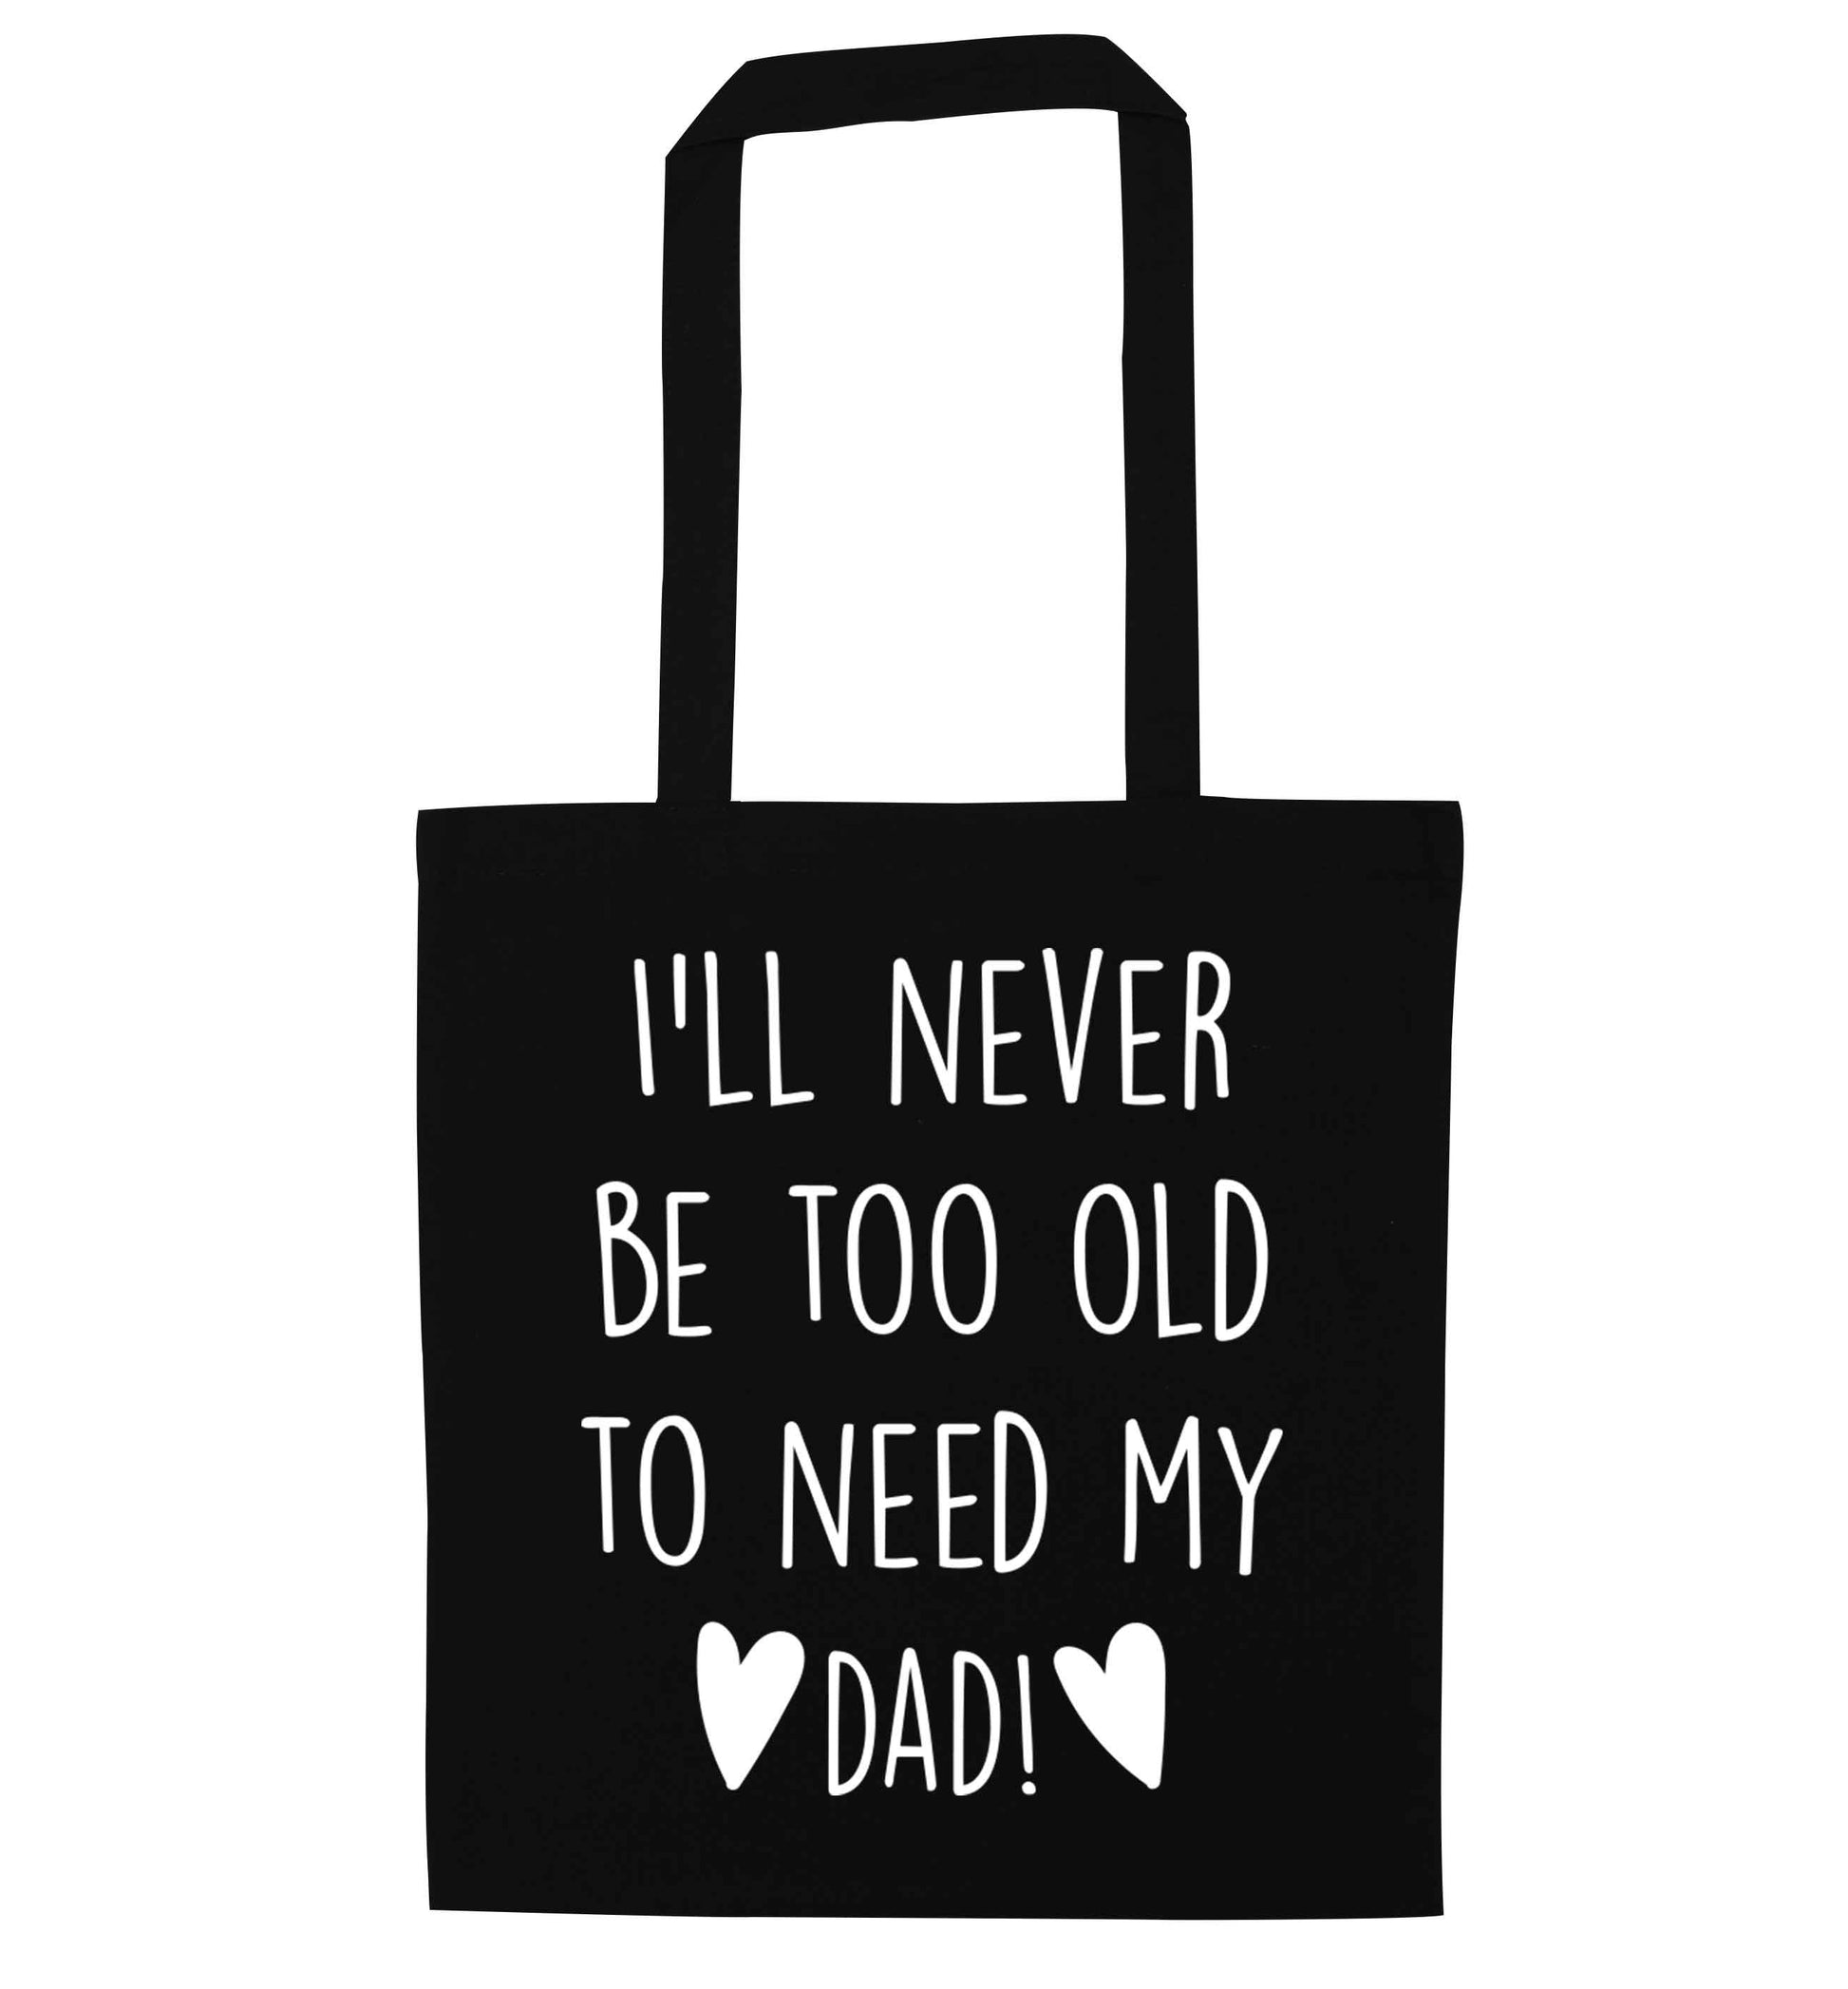 I'll never be too old to need my dad black tote bag